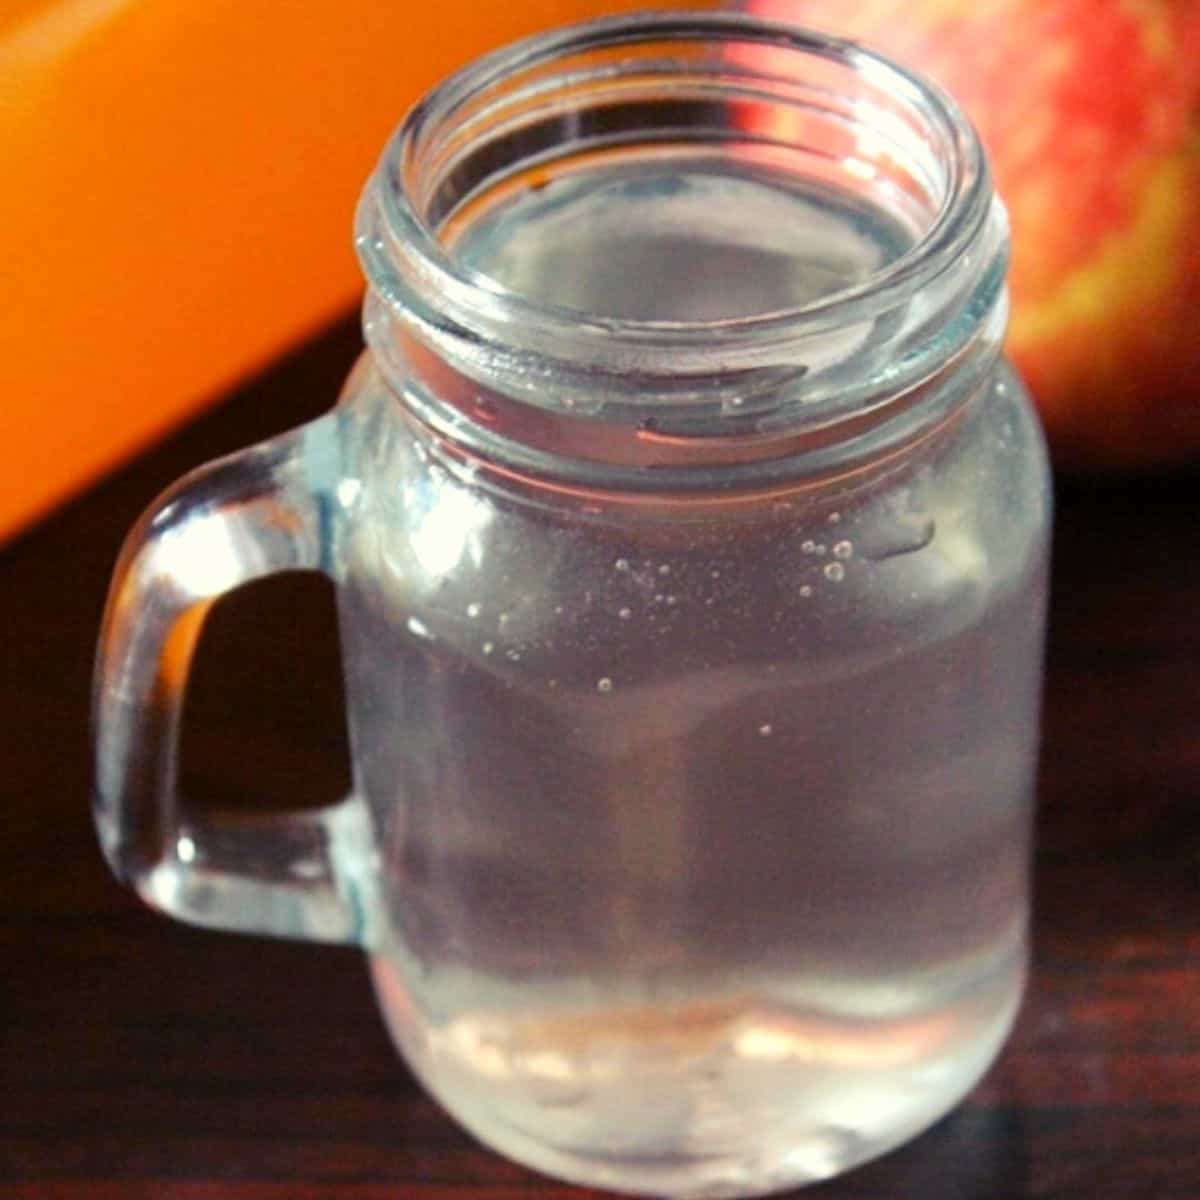 apple cider vinegar for weight loss, acv belly fat - Yummy Indian Kitchen